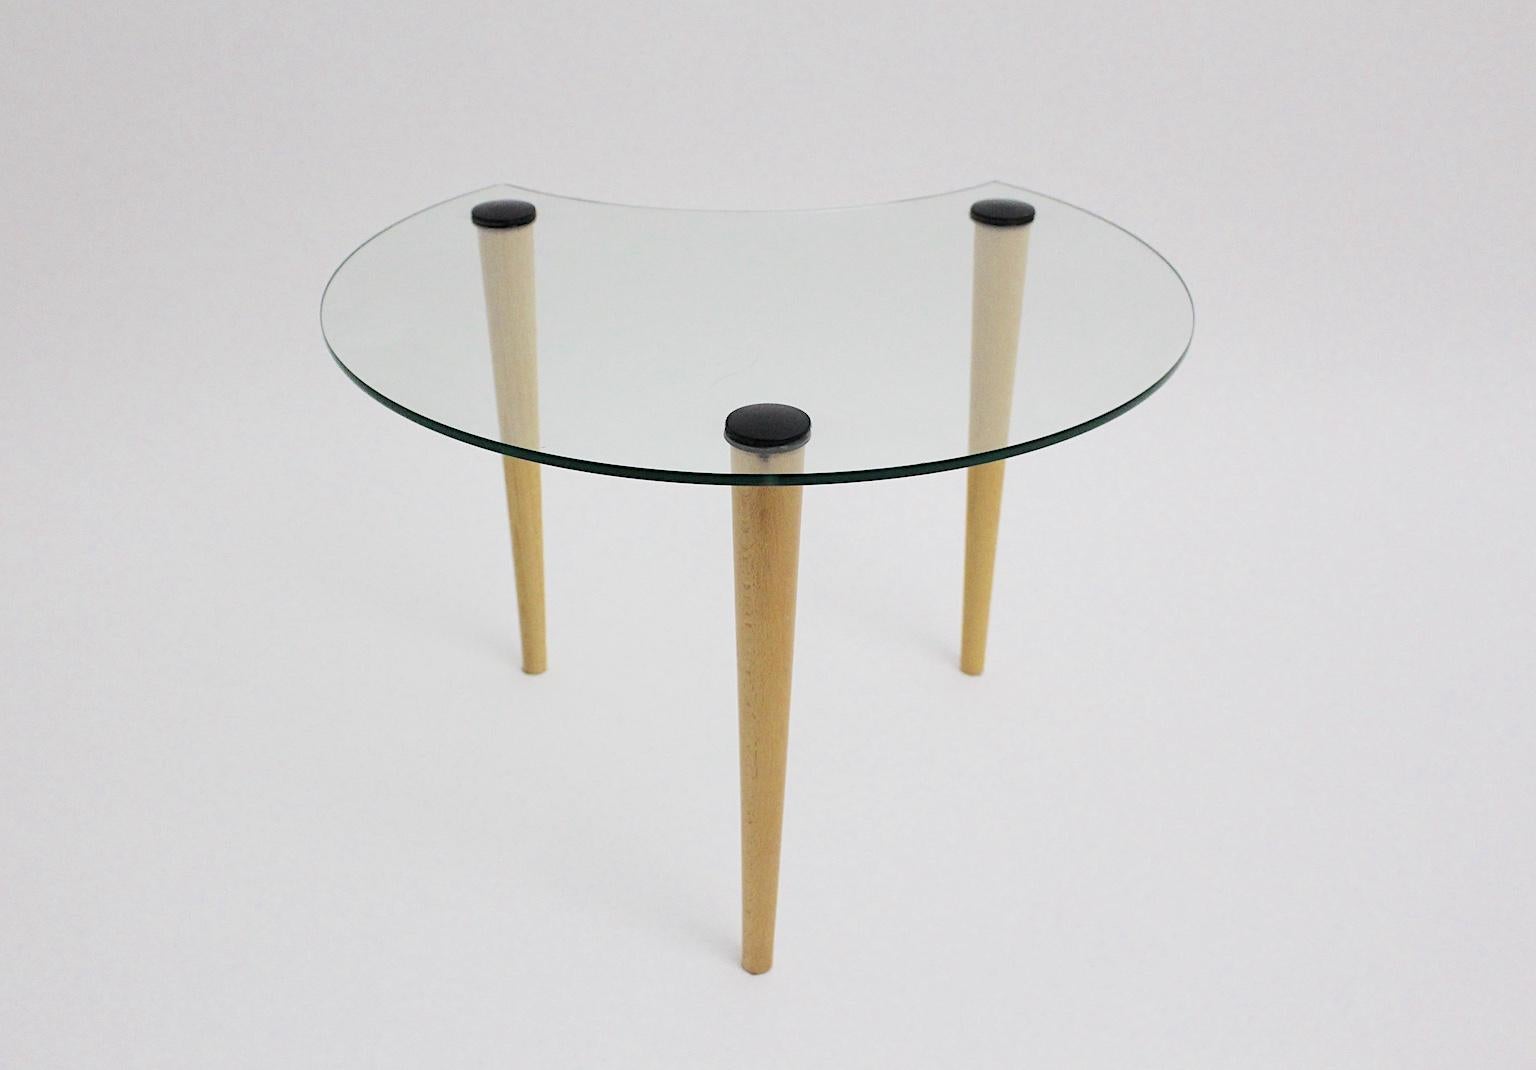 This vintage glass coffee table / side table shows a sickle-shaped glass top and three beech legs. The coffee table was designed and made in the 1970s in Italy.
The vintage condition is very good.
Approx. measures:
Diameter 60 cm
Height 42 cm.